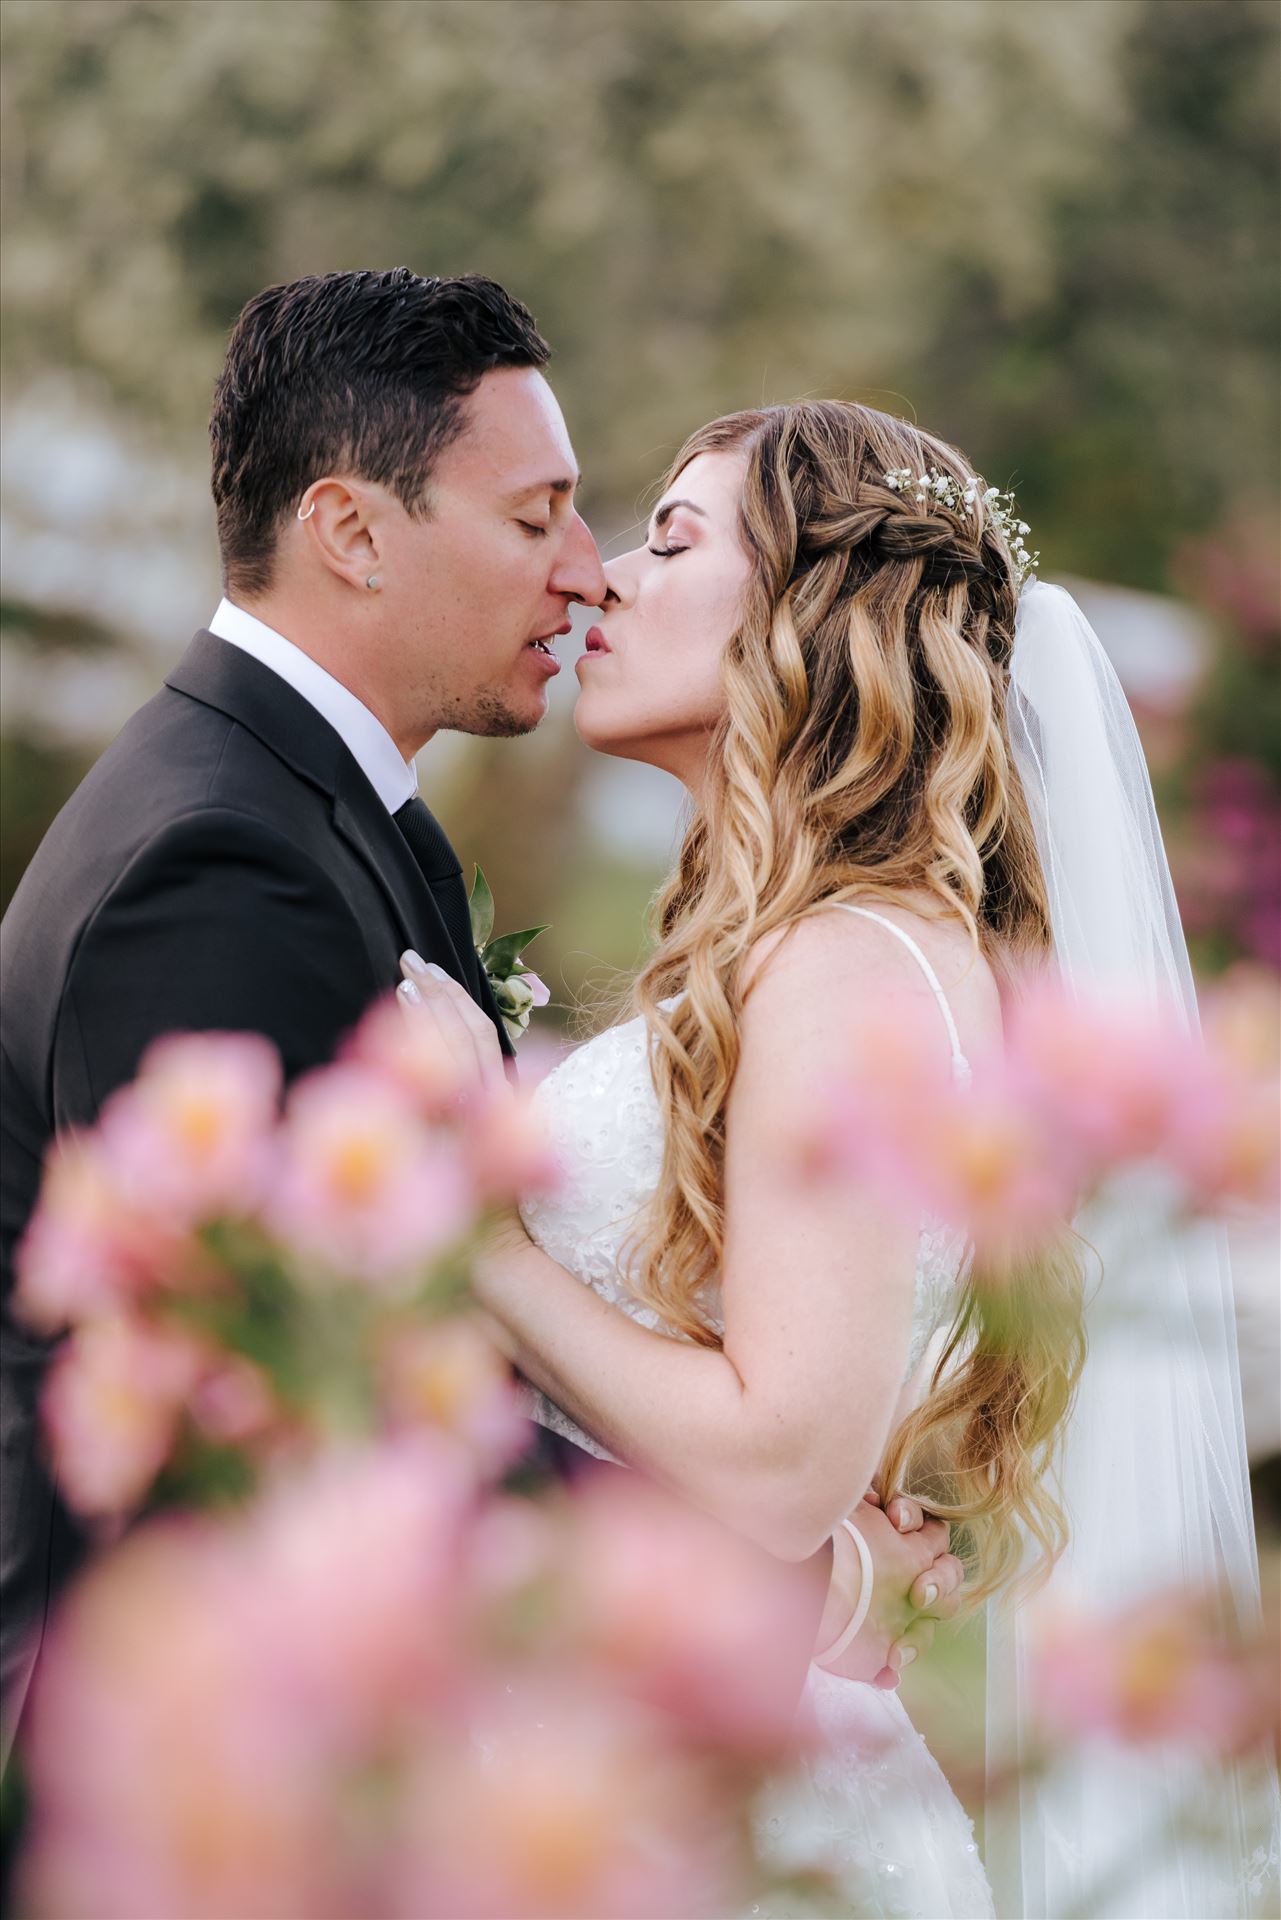 FW-6736.JPG - Mirror's Edge Photography, a San Luis Obispo Wedding and Engagement Photographer, captures Rashel and Brian's Wedding Day at the Madonna Inn in San Luis Obispo. A secret kiss in the secret garden. by Sarah Williams